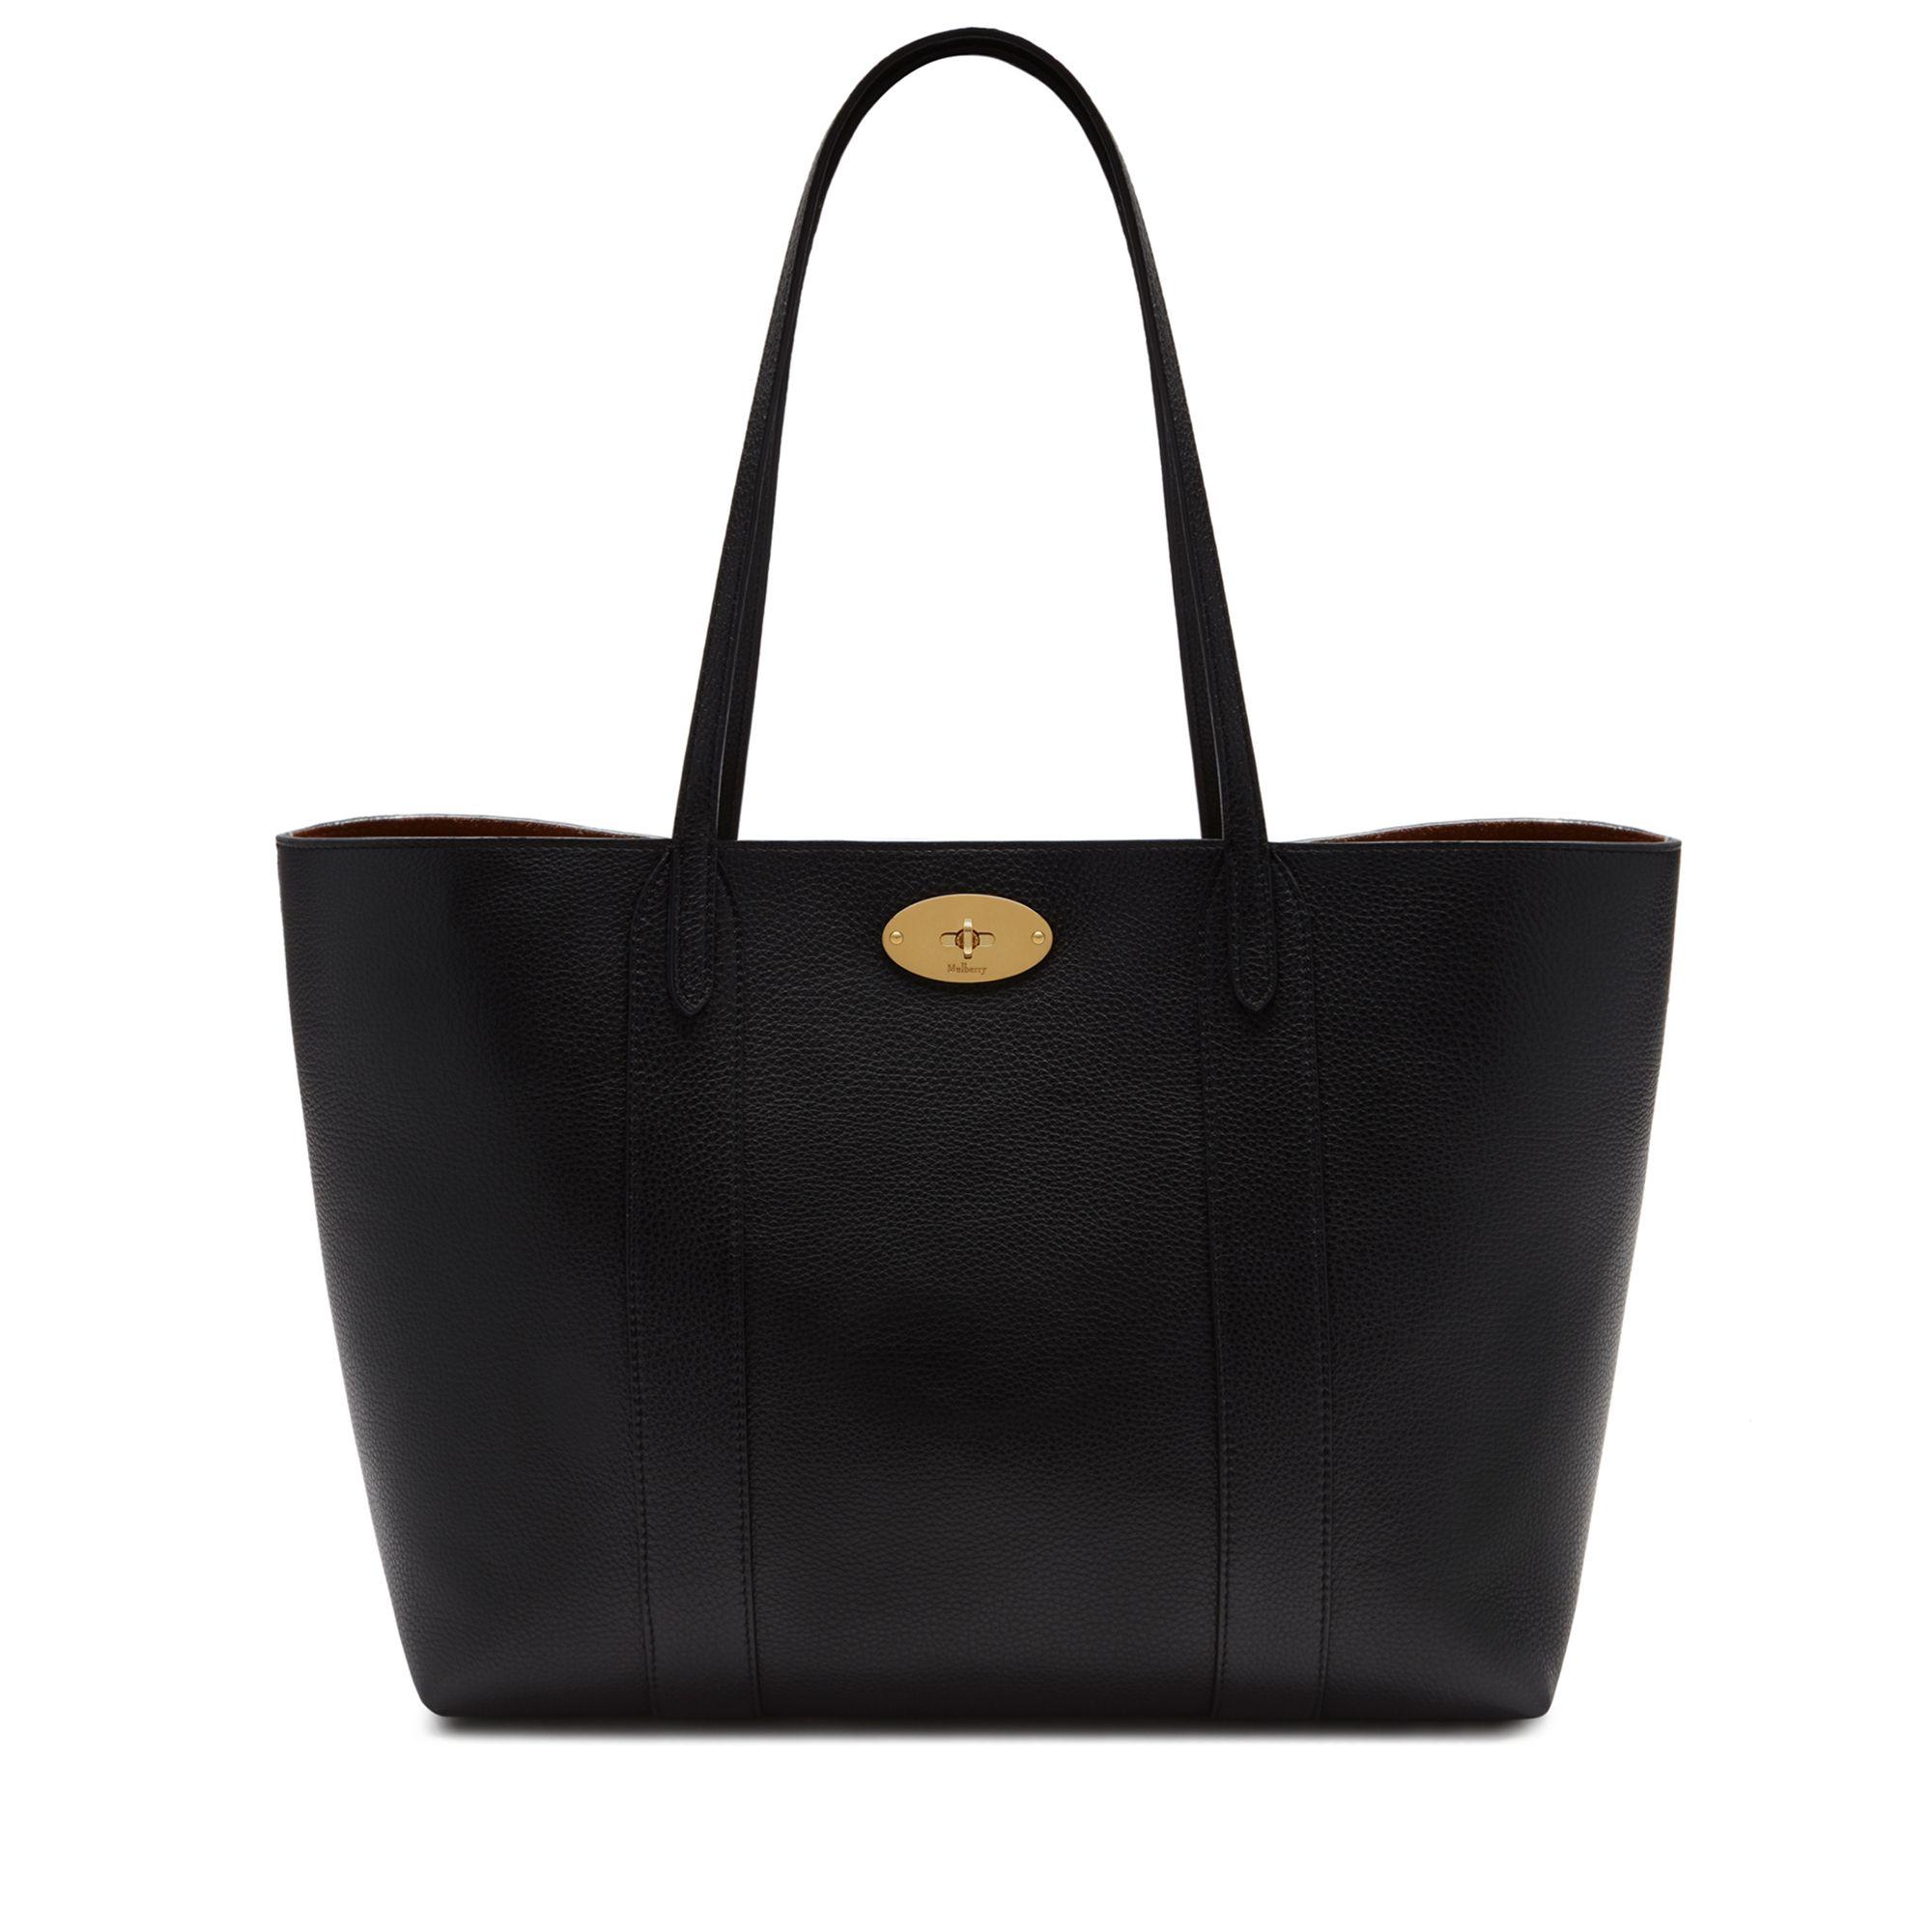 Lyst - Mulberry Bayswater Tote In Black Small Classic Grain in Black